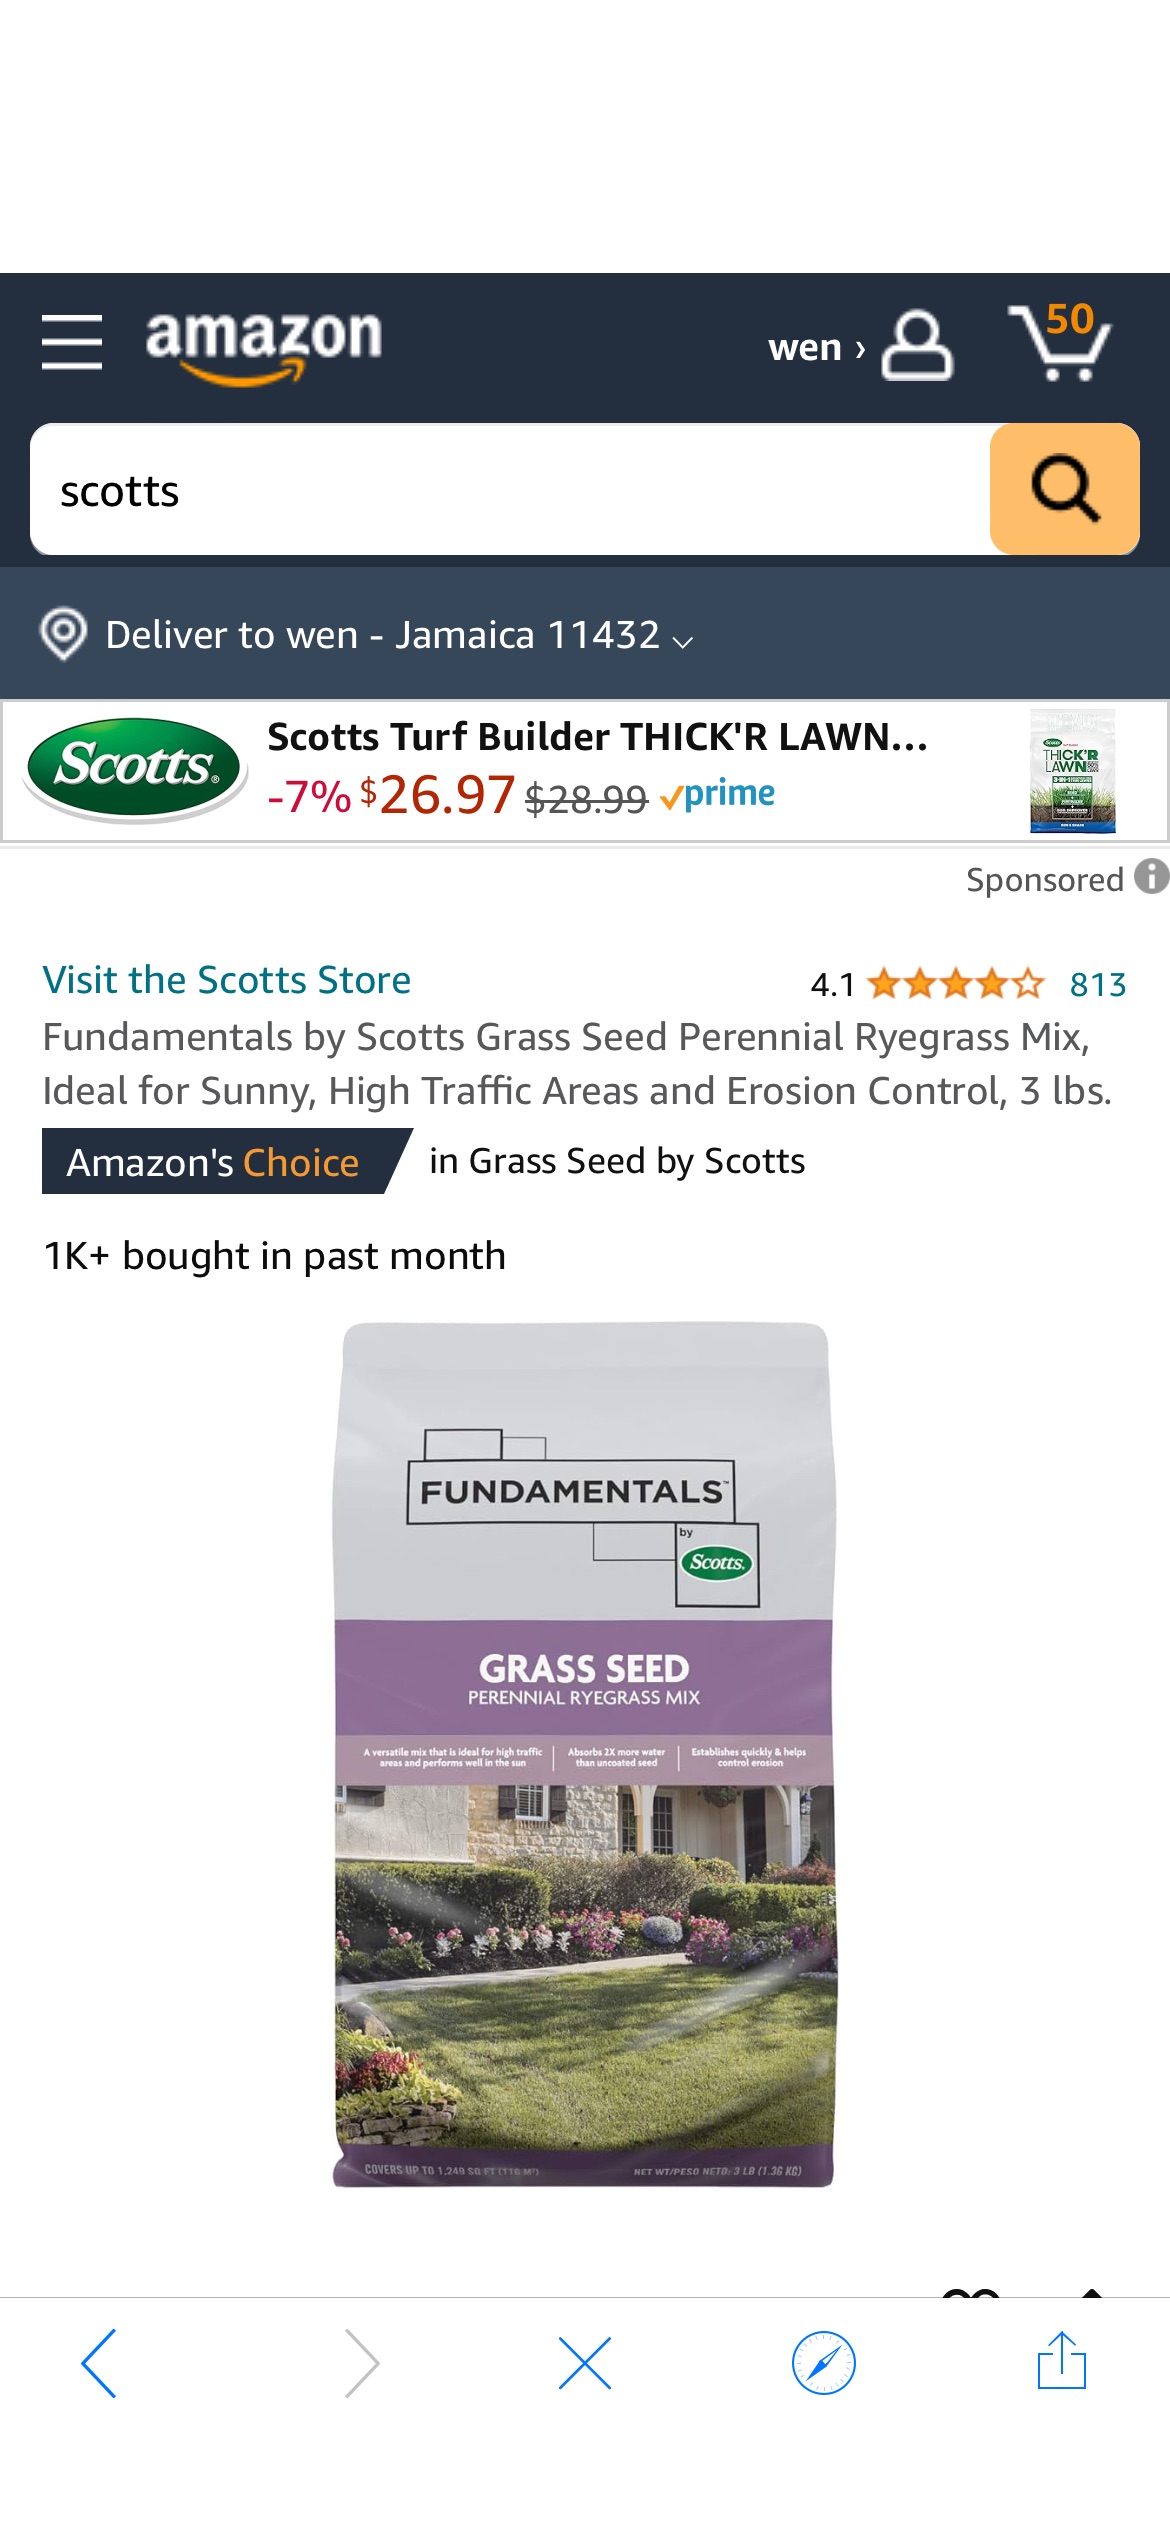 Amazon.com : Fundamentals by Scotts Grass Seed Perennial Ryegrass Mix, Ideal for Sunny, High Traffic Areas and Erosion Control, 3 lbs. : Patio, Lawn & Garden